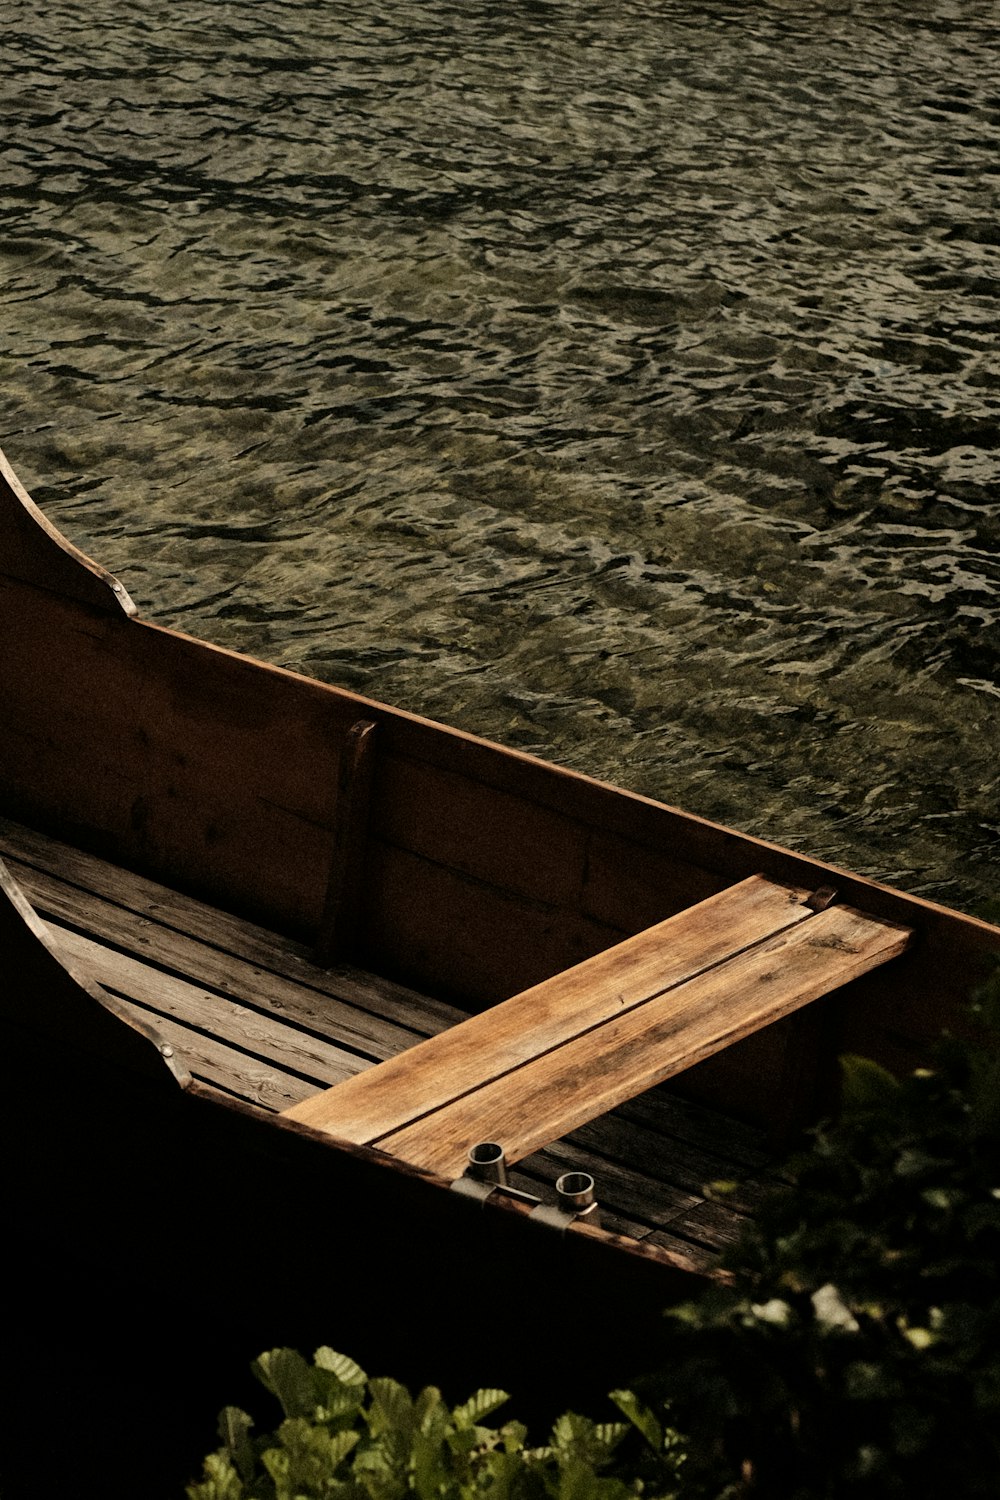 A small wooden boat floating on top of a body of water photo